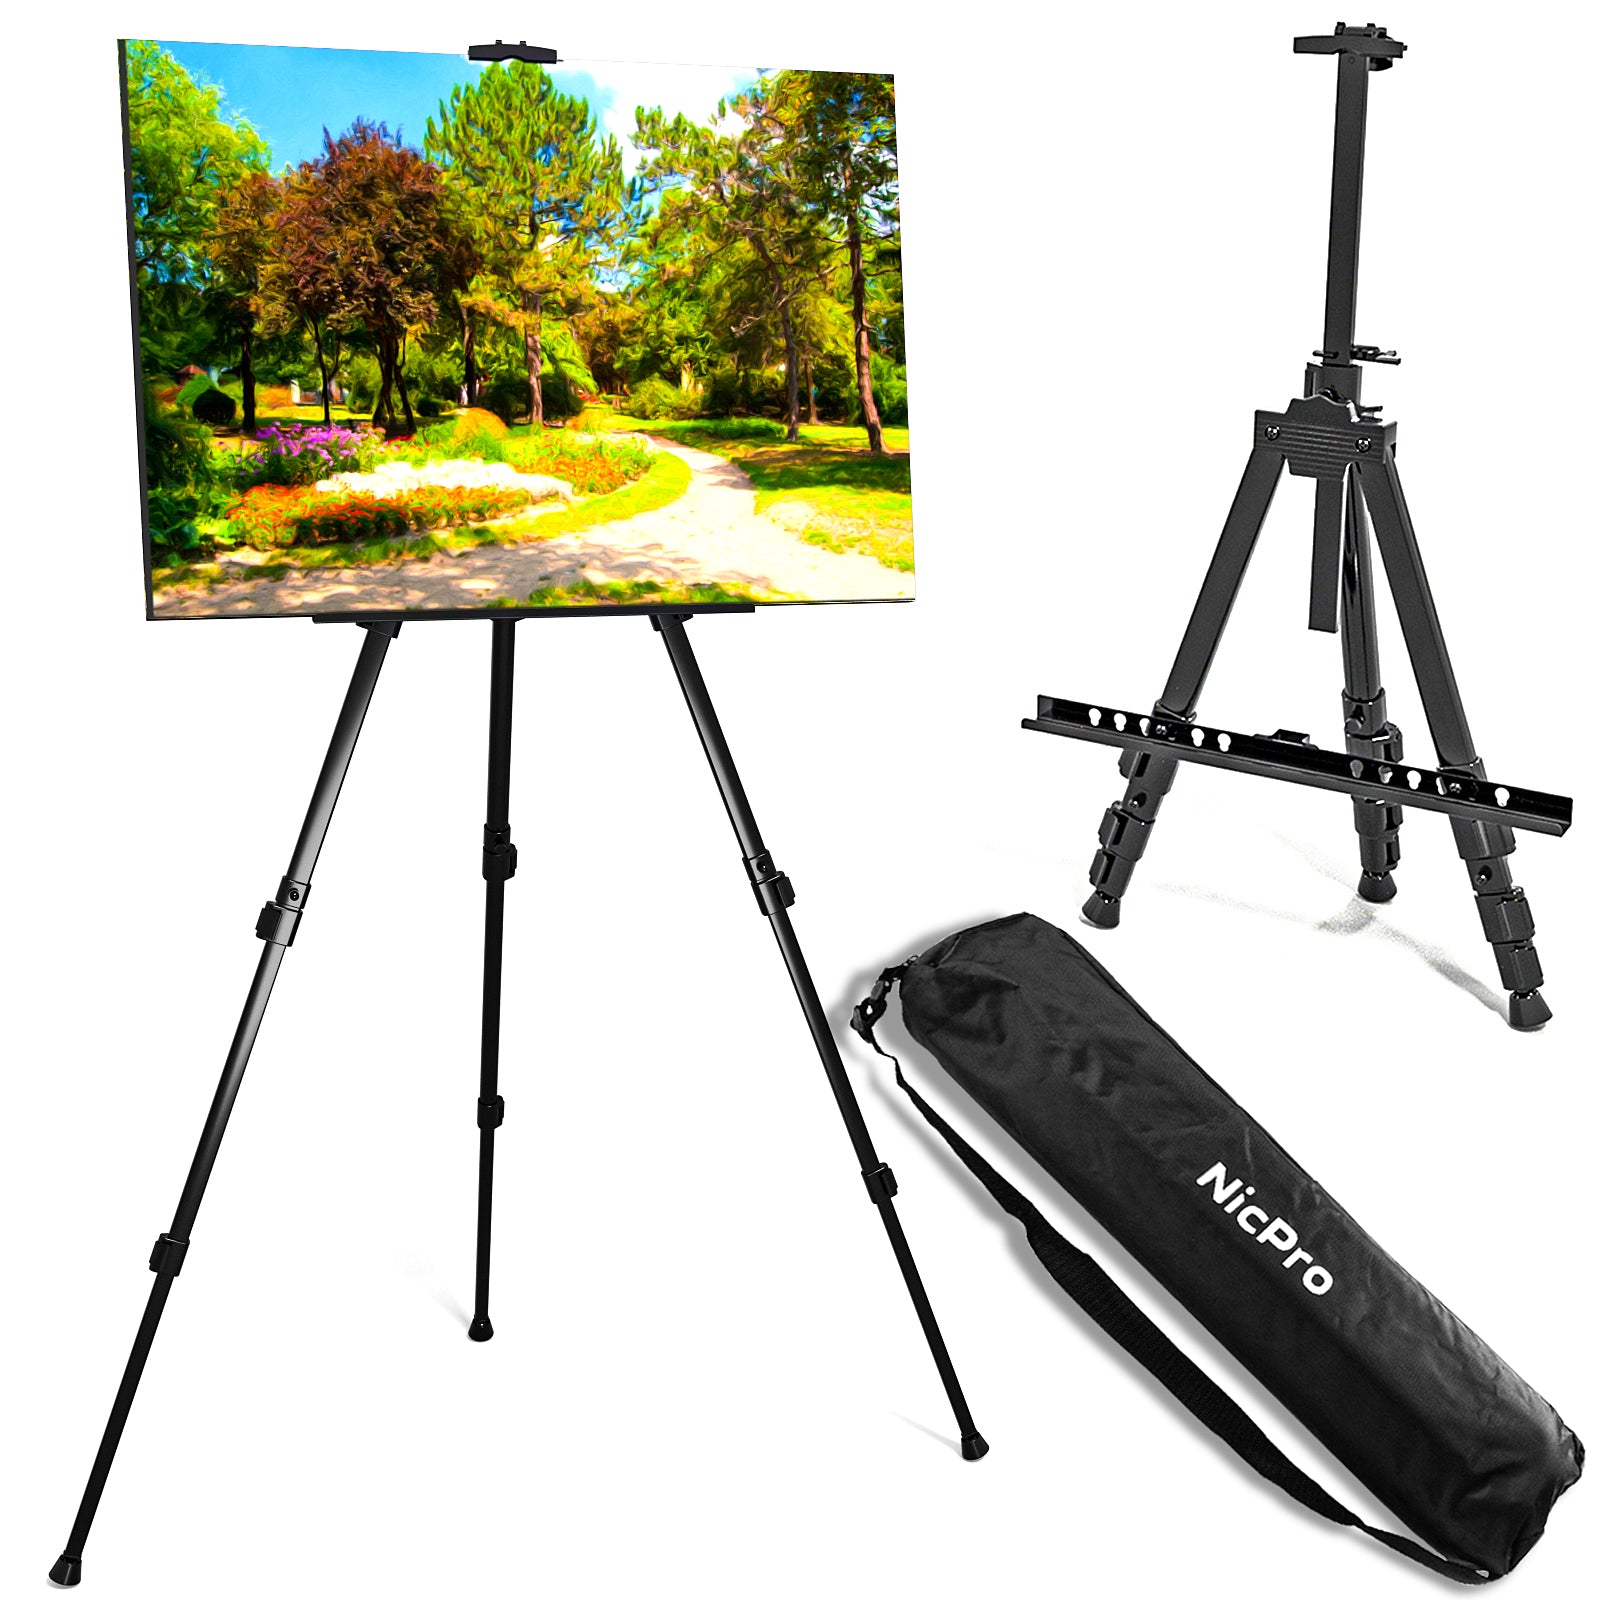 Nicpro Painting Easel for Display, Adjustable Height 17 to 63 Tablet